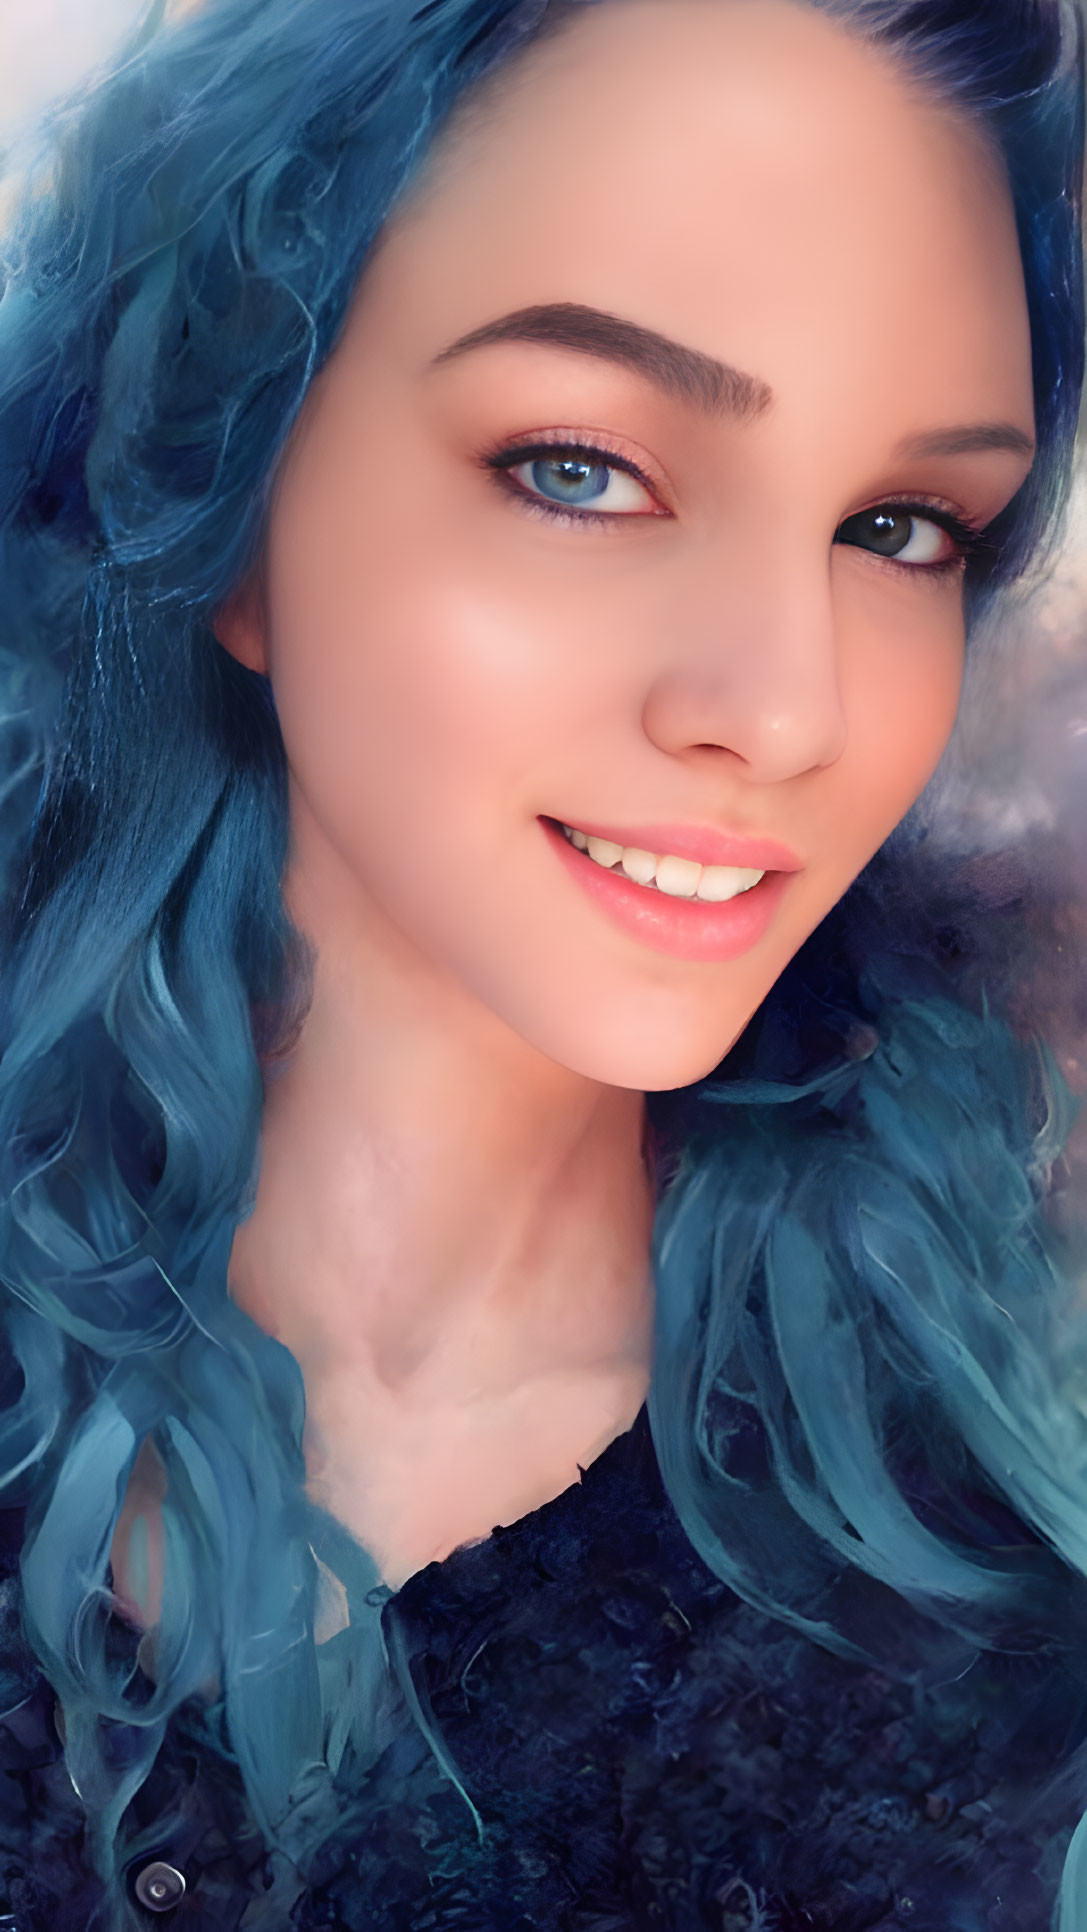 Blue-haired woman with striking blue eyes in soft smile close-up portrait.